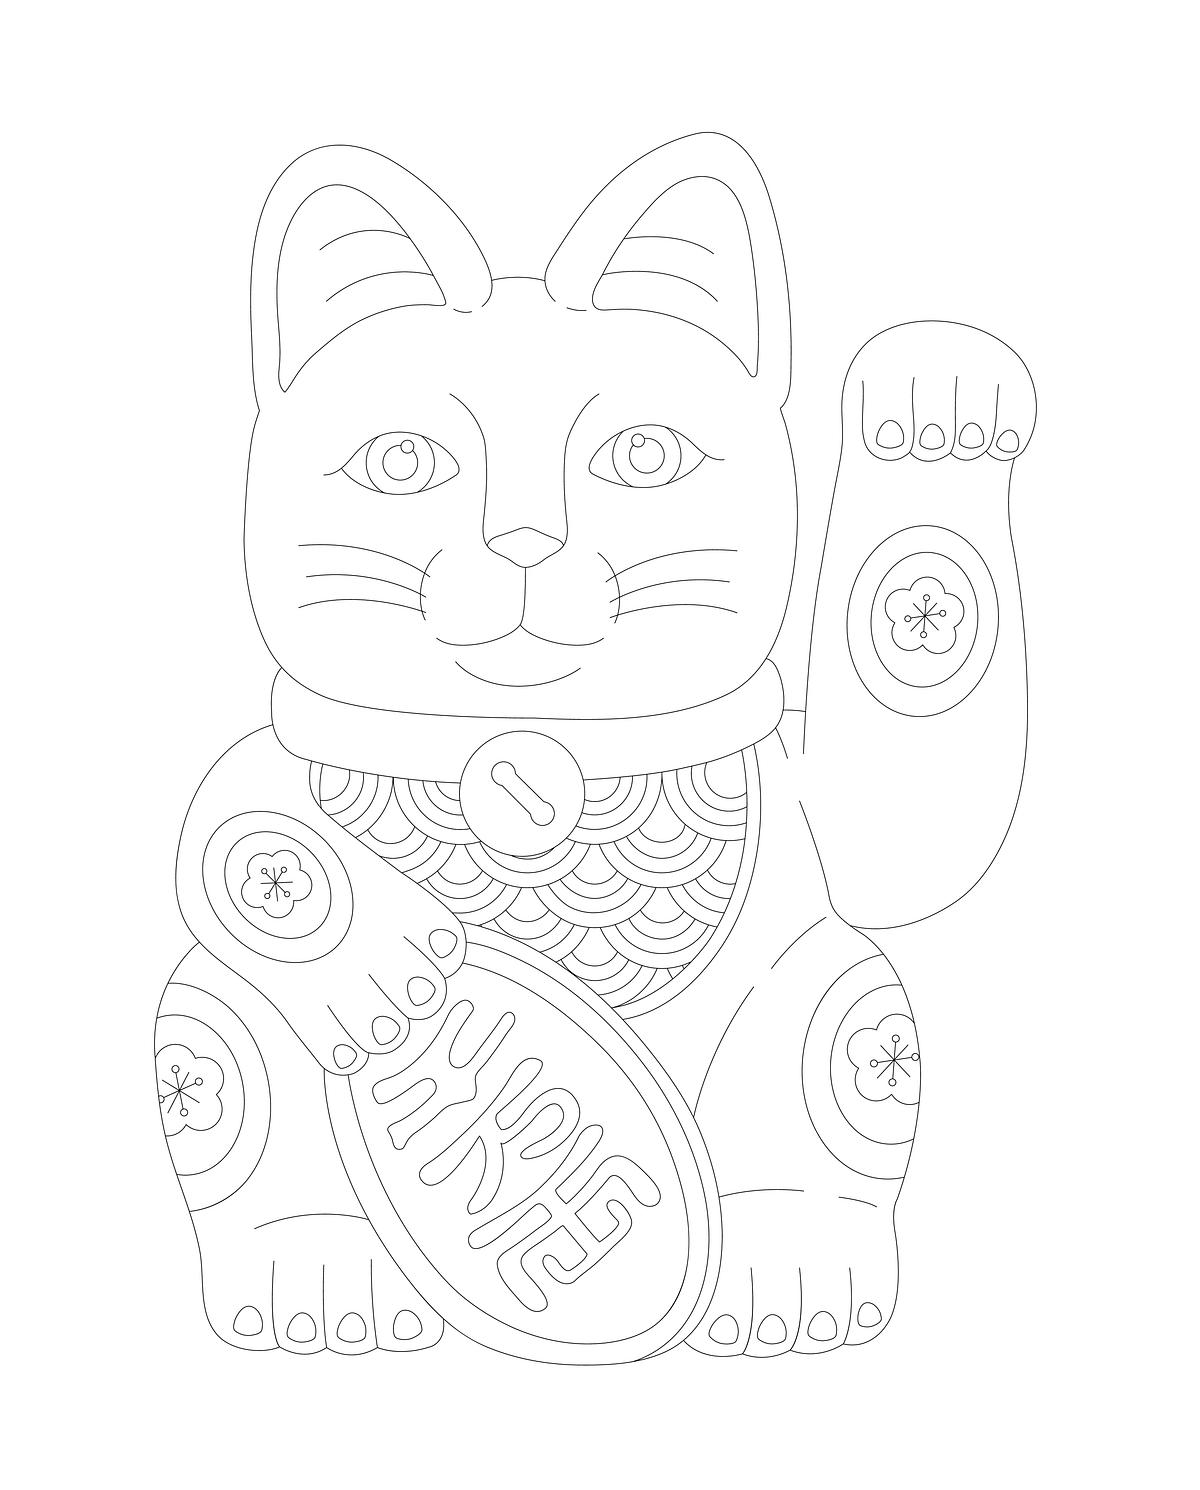 Download Japanese beckoning cat adult coloring | Free stock vector ...